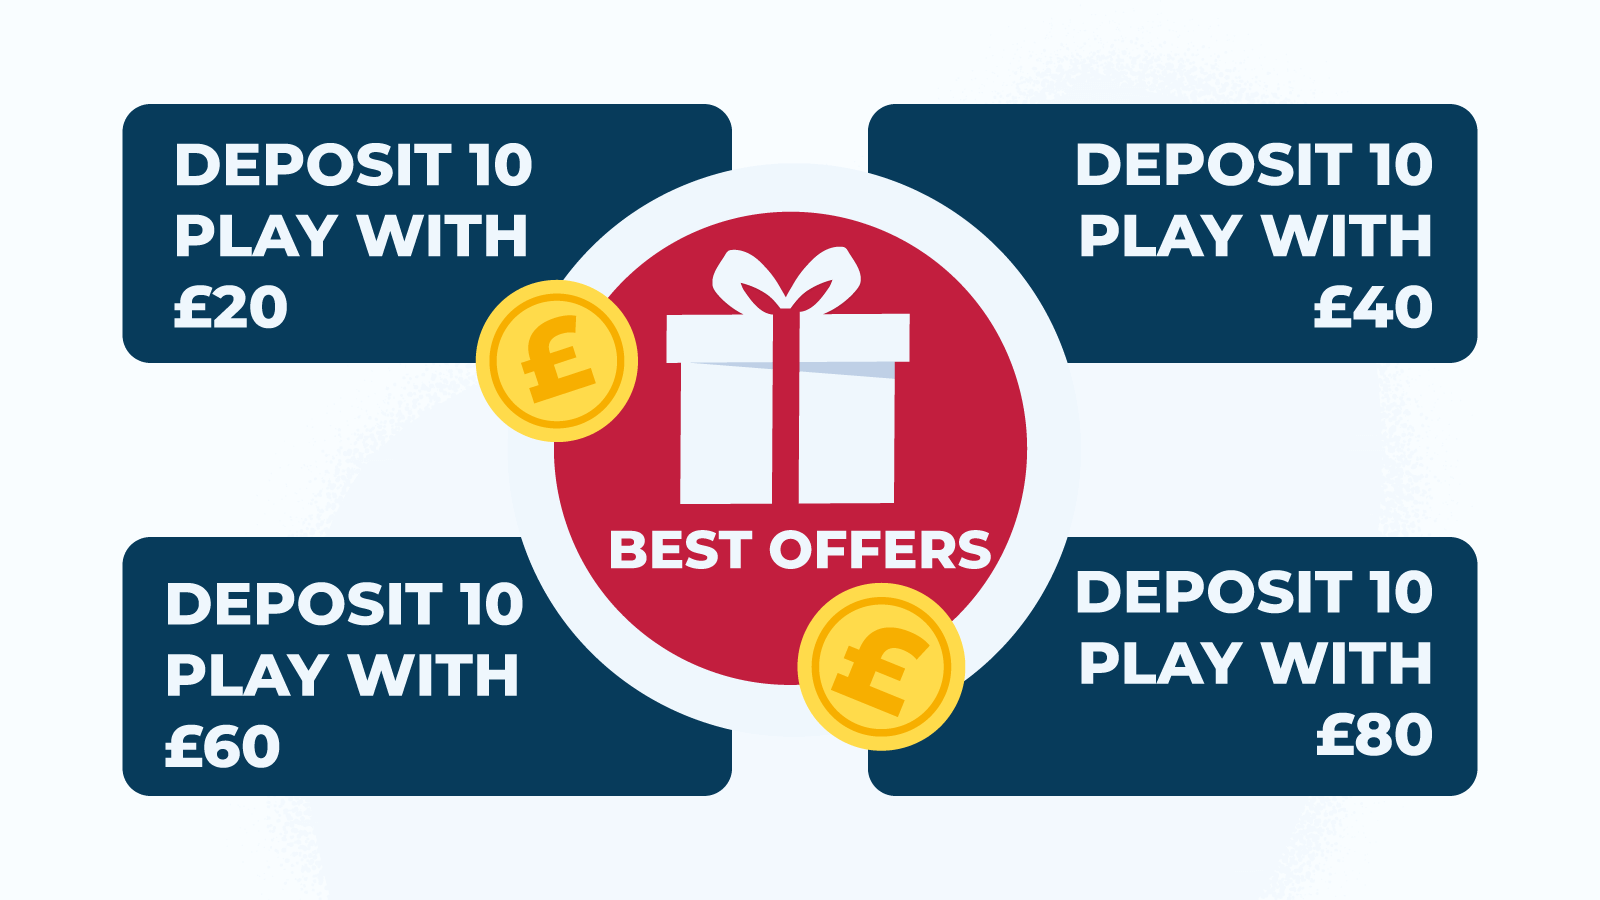 (BEFORE) Deposit 10 Play with £20 – Top Choice